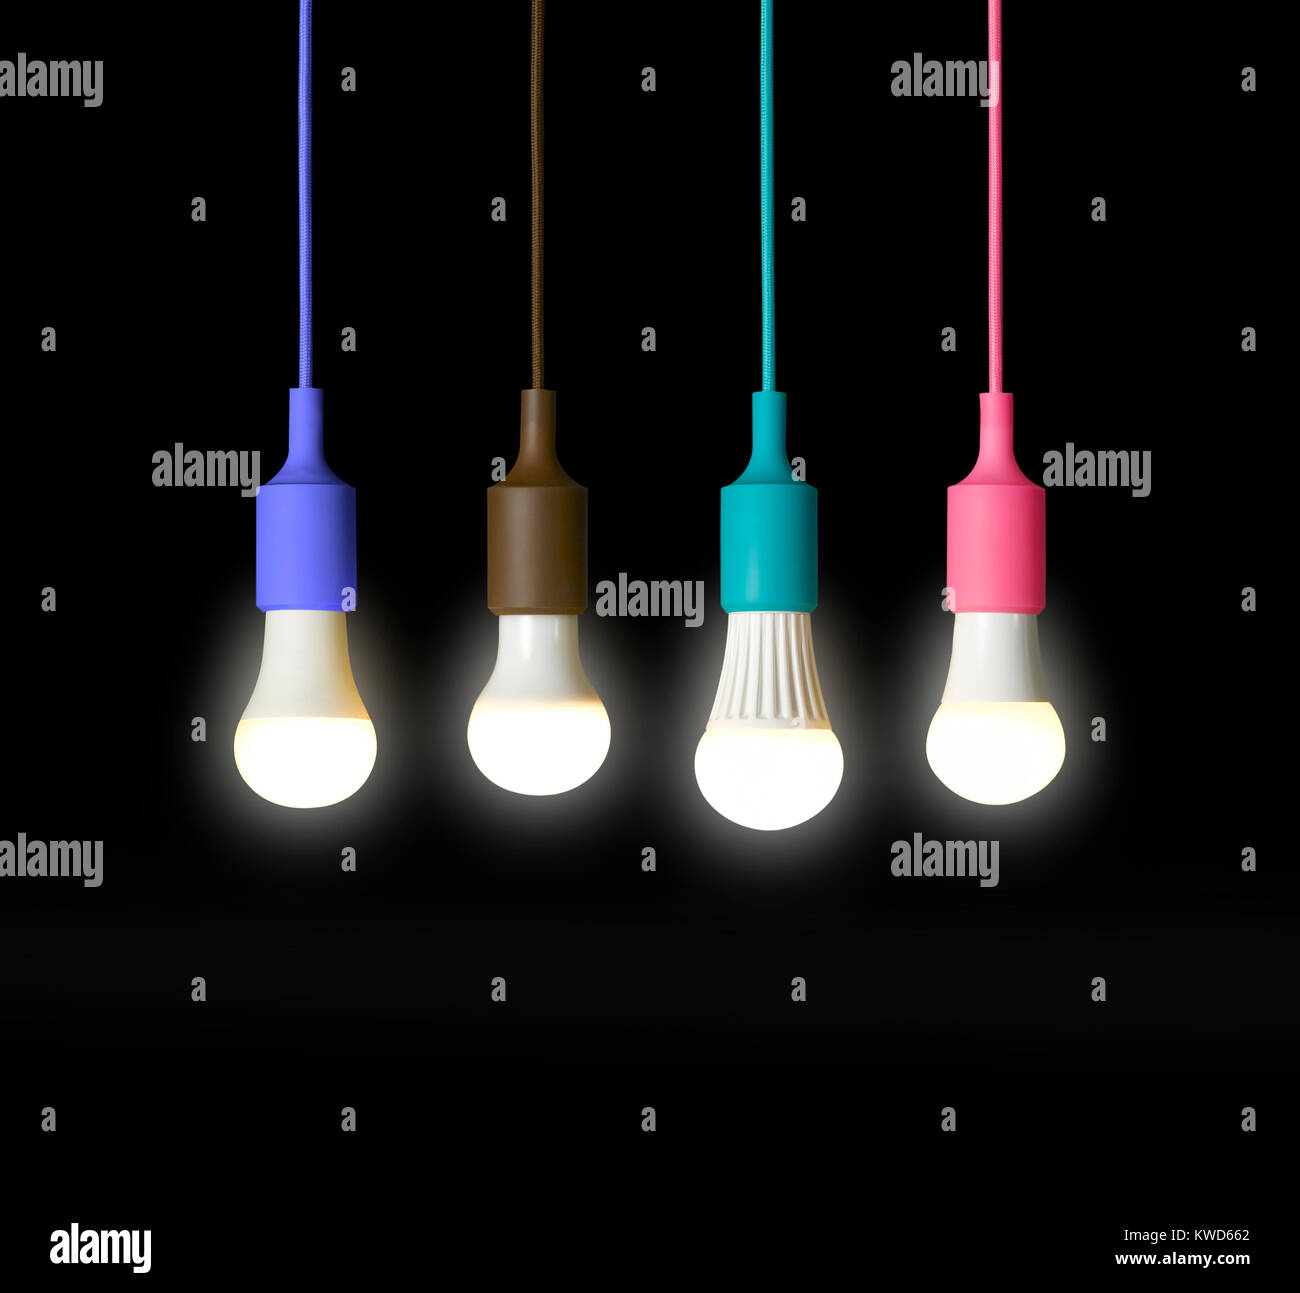 a shot of four light bulbs in four different coloured pendant holders against a black background Stock Photo